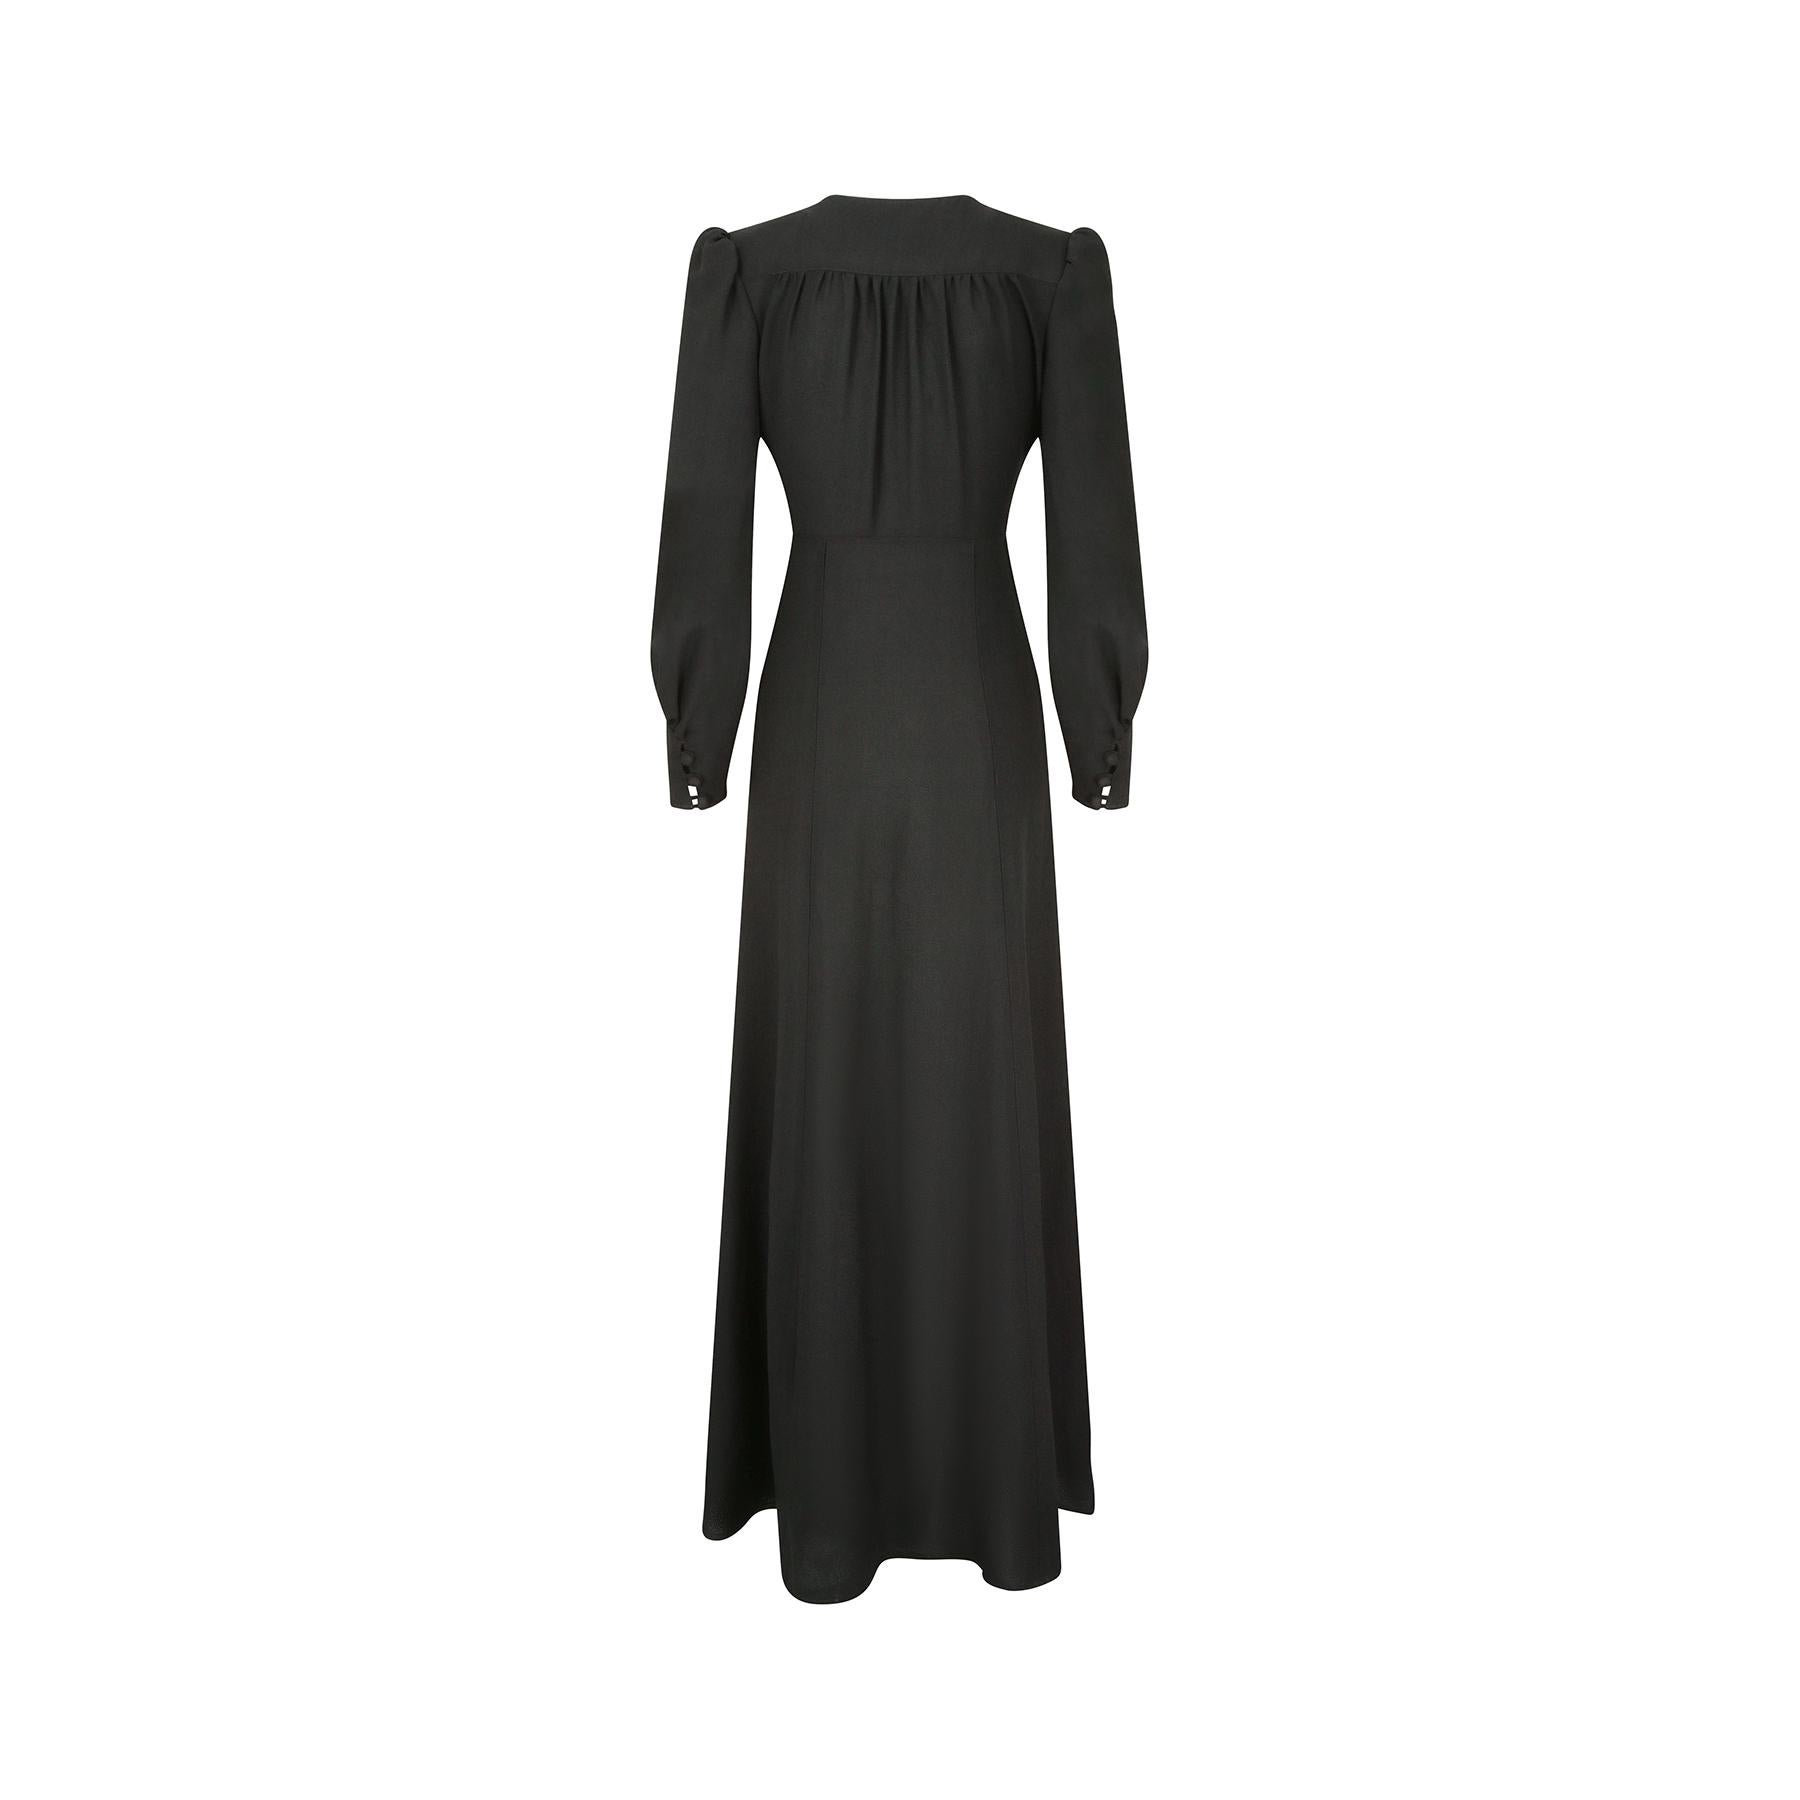 Original 1970s Ozzie Clark for Radley moss crepe waspie dress. This is a classic Ozzie design that has made him one of the most enduring and admired fashion designers of the 20th century. It features a deep v neck and is seamed under the bust with a